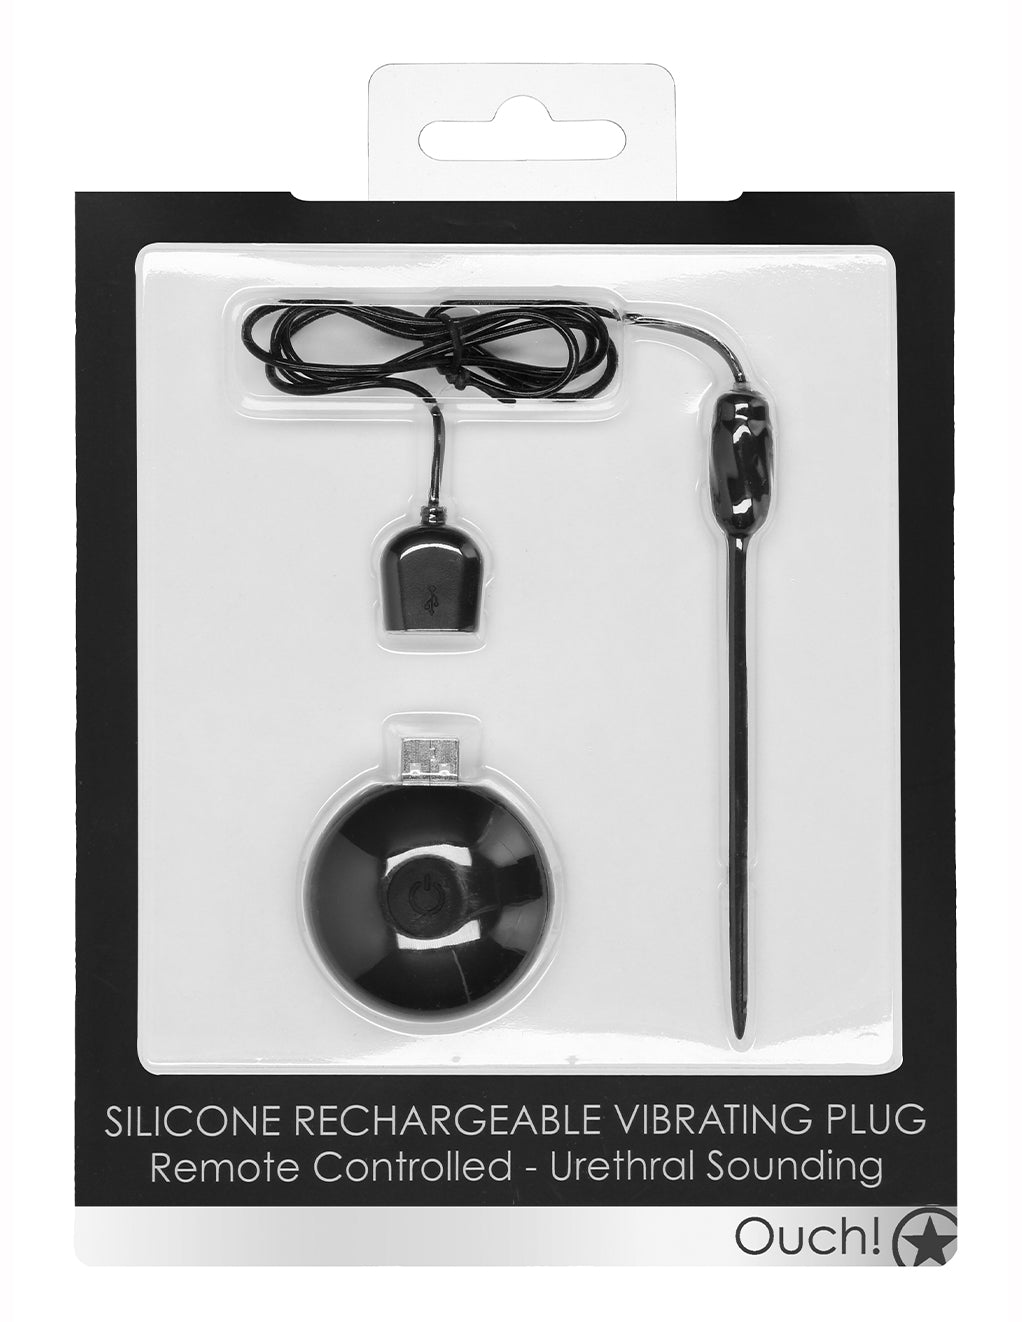 OUCH! Silicone Vibrating Urethra Plug- Package